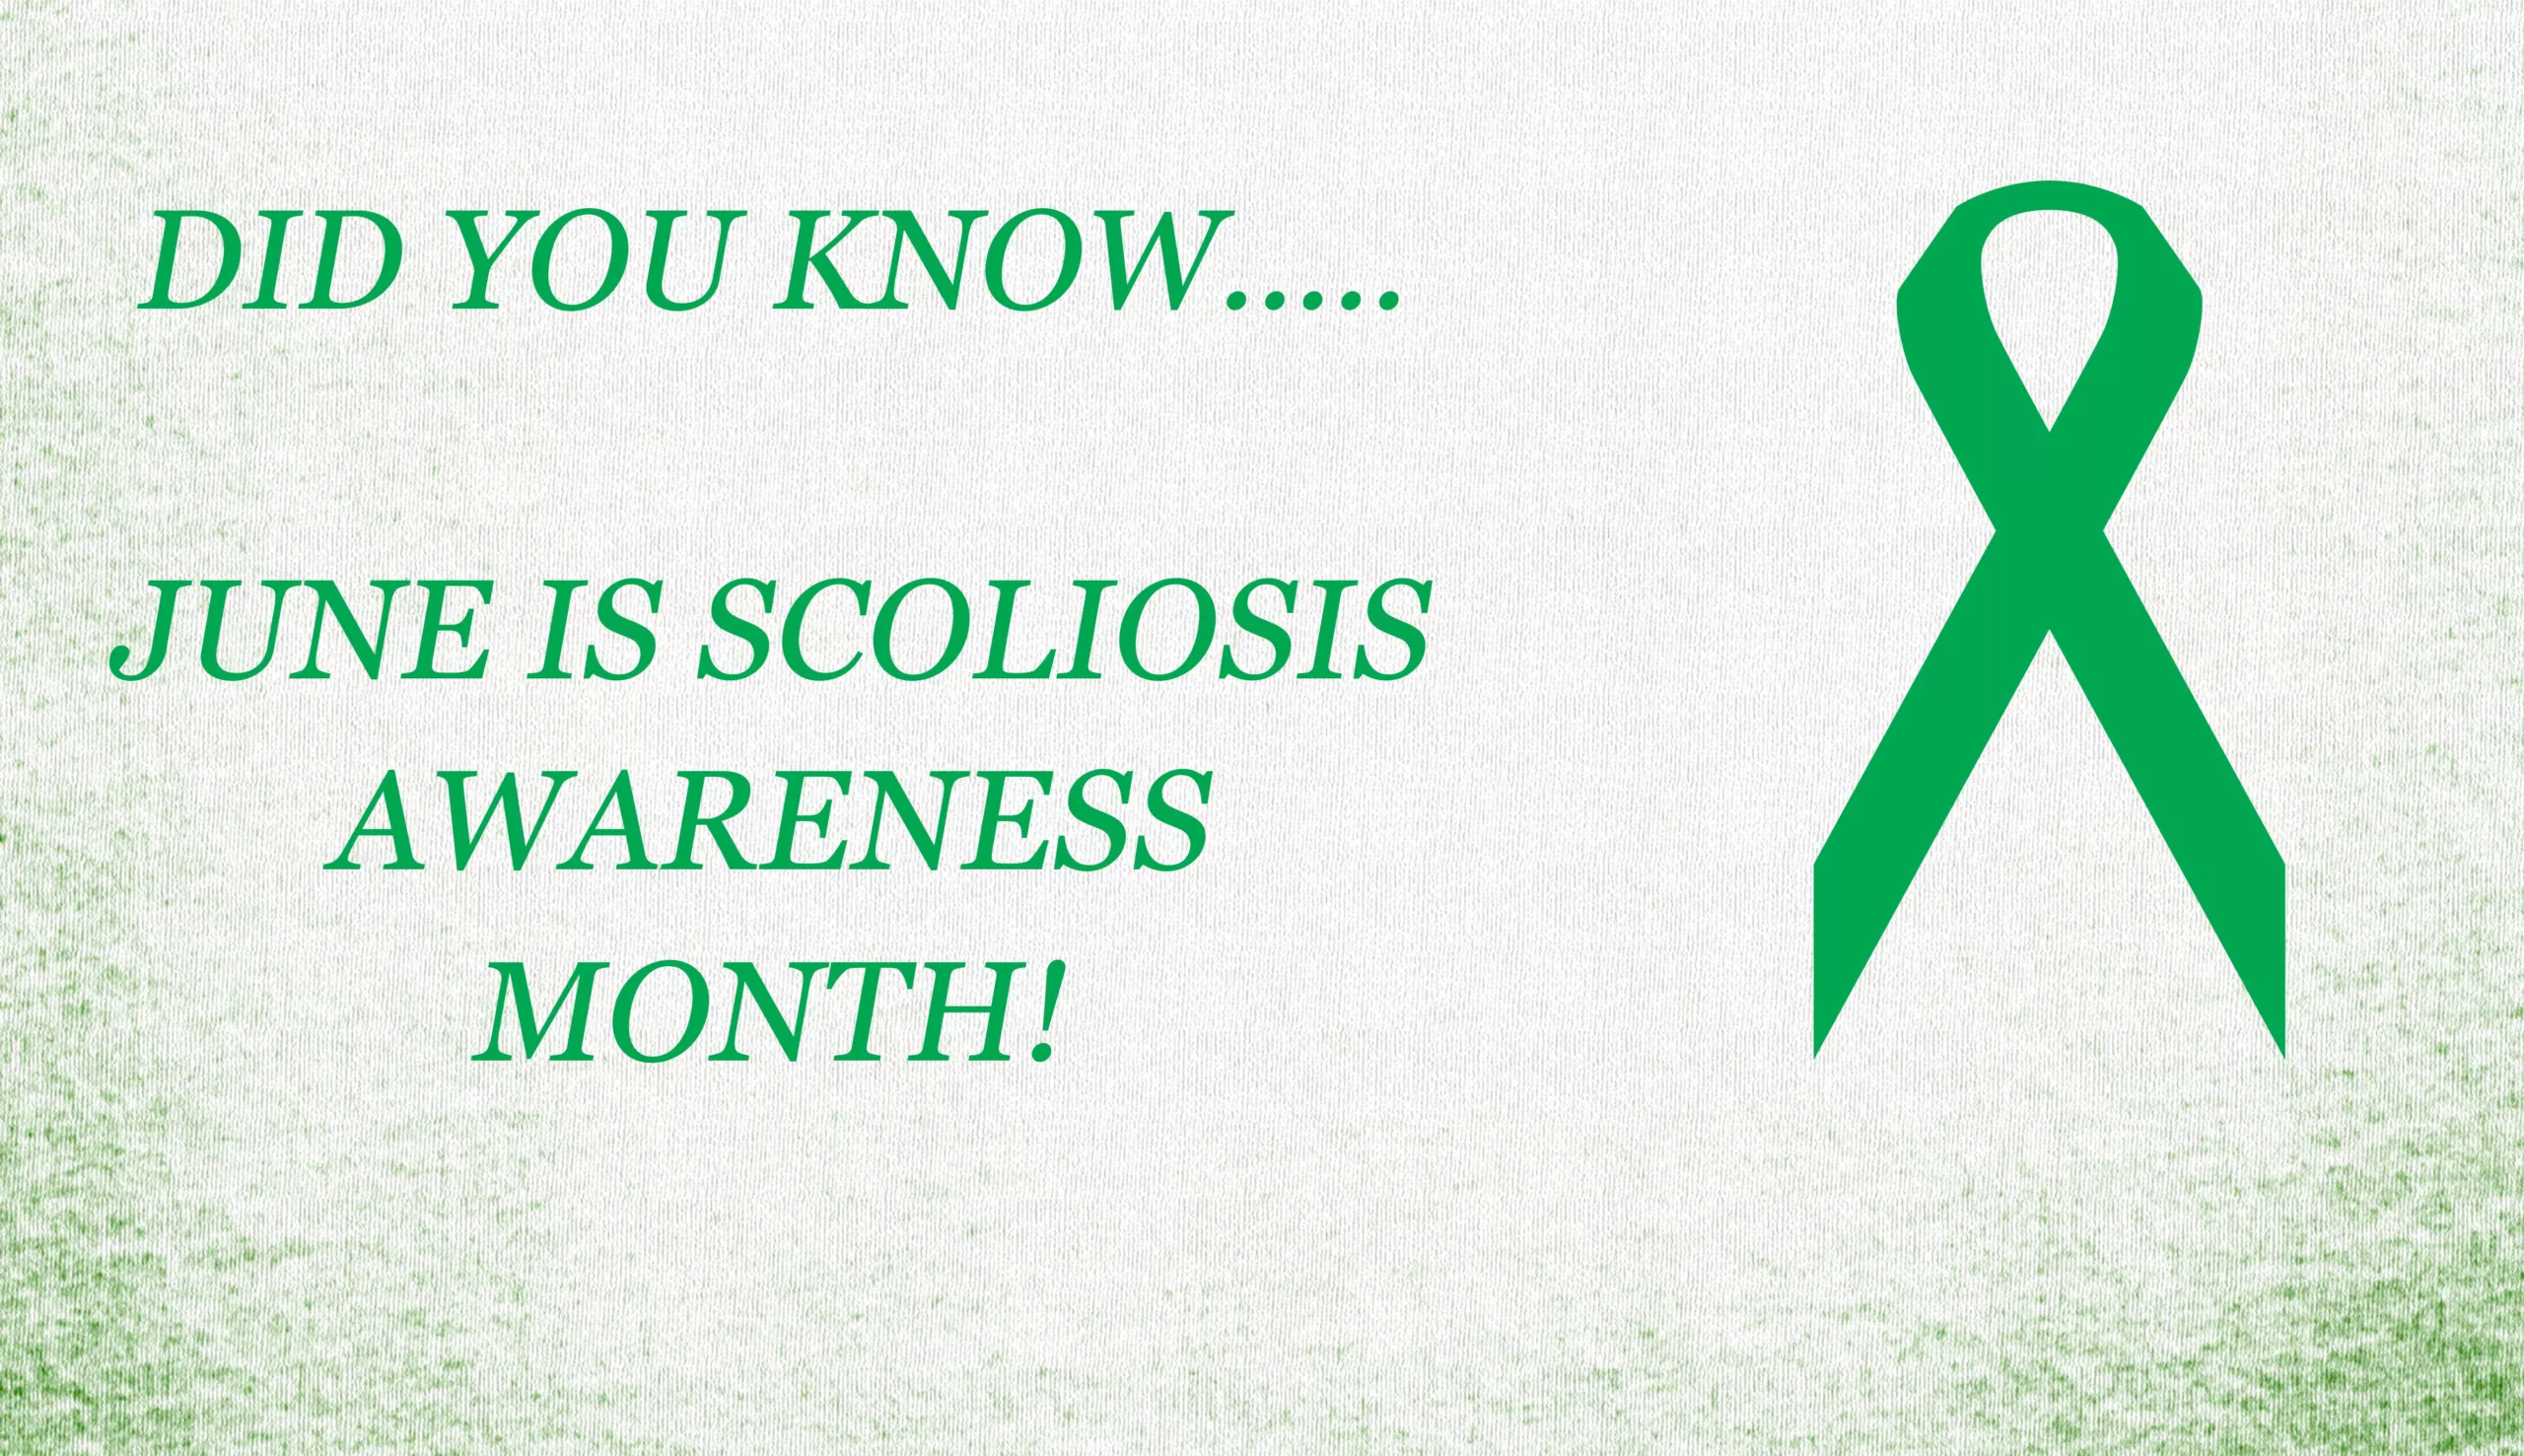 Scoliosis awareness month